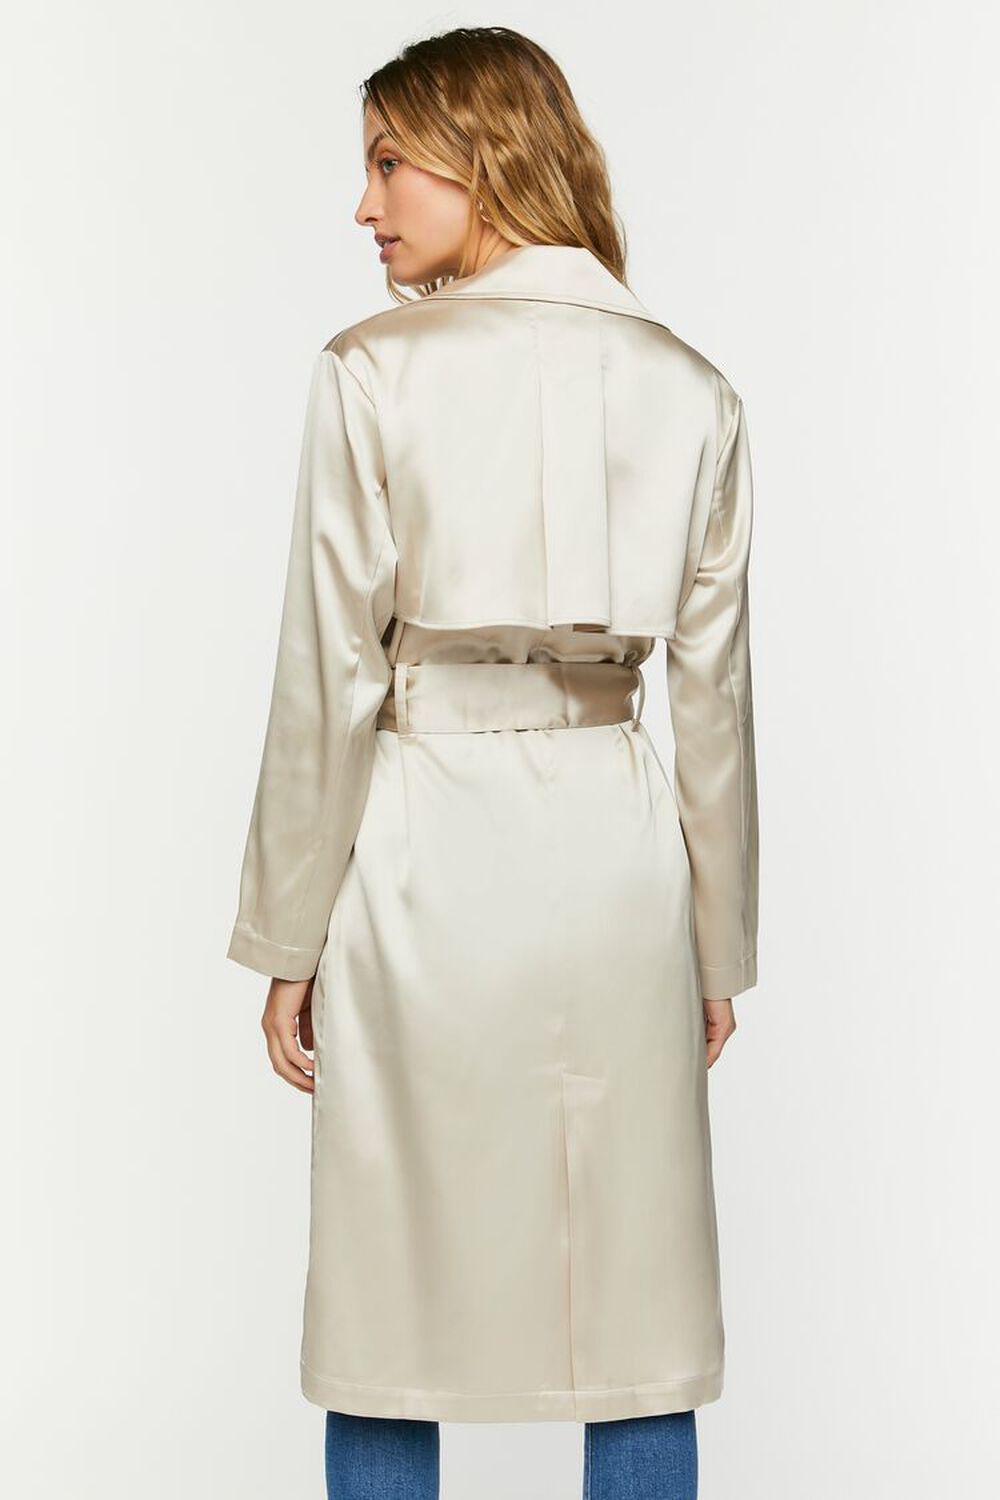 GREY Satin Double-Breasted Trench Coat, image 3